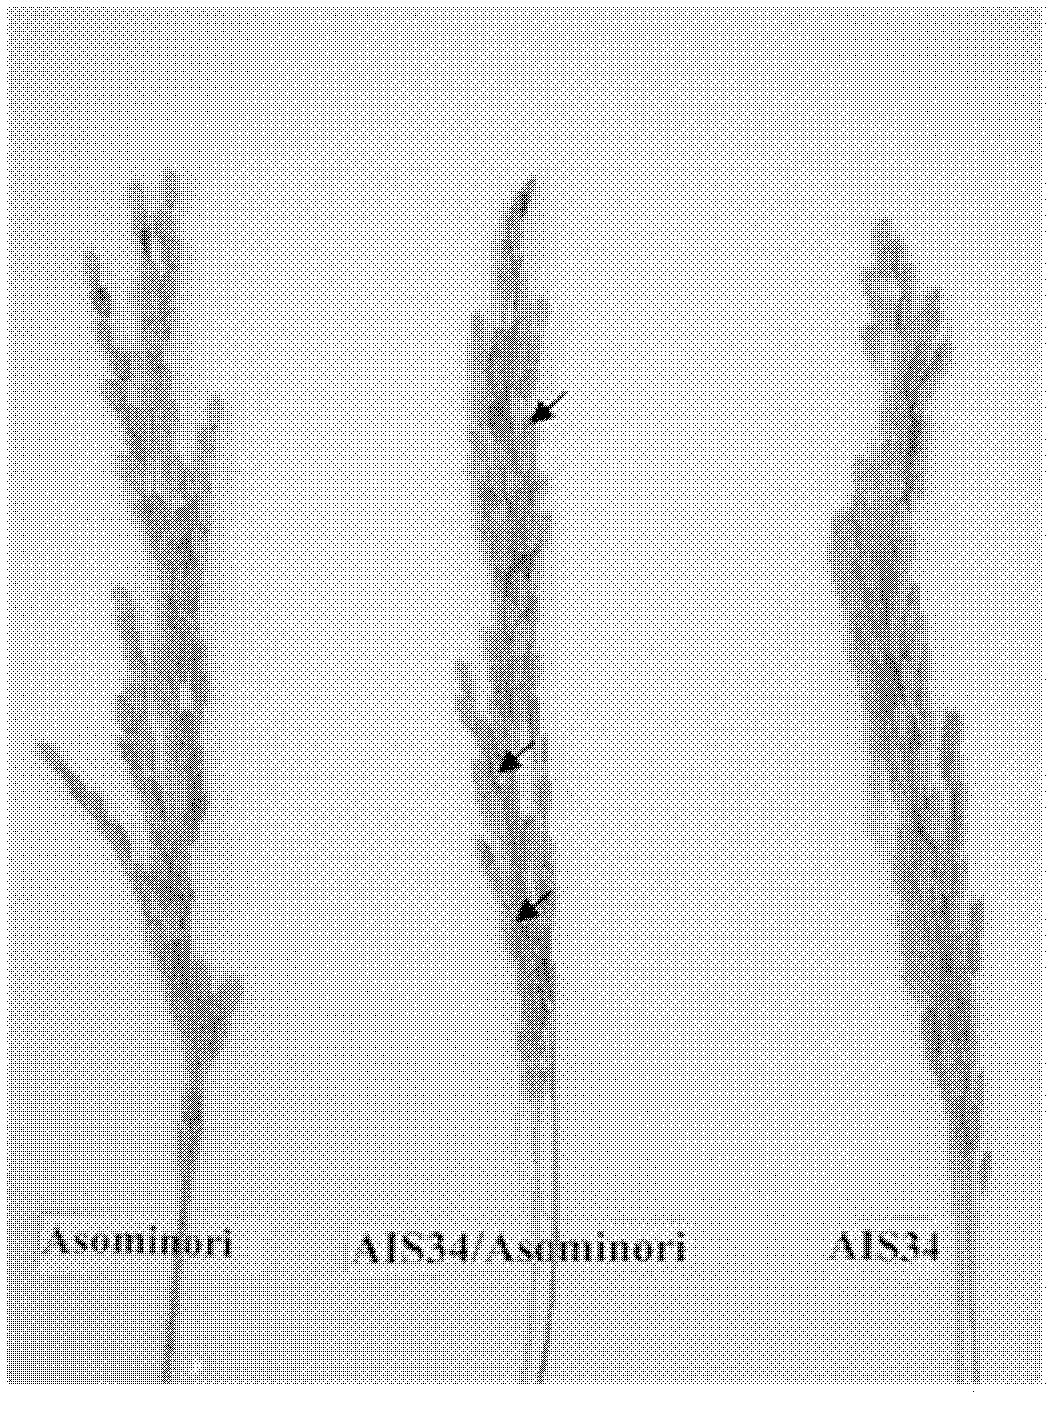 Method for separating two tightly linked rice sterile genes